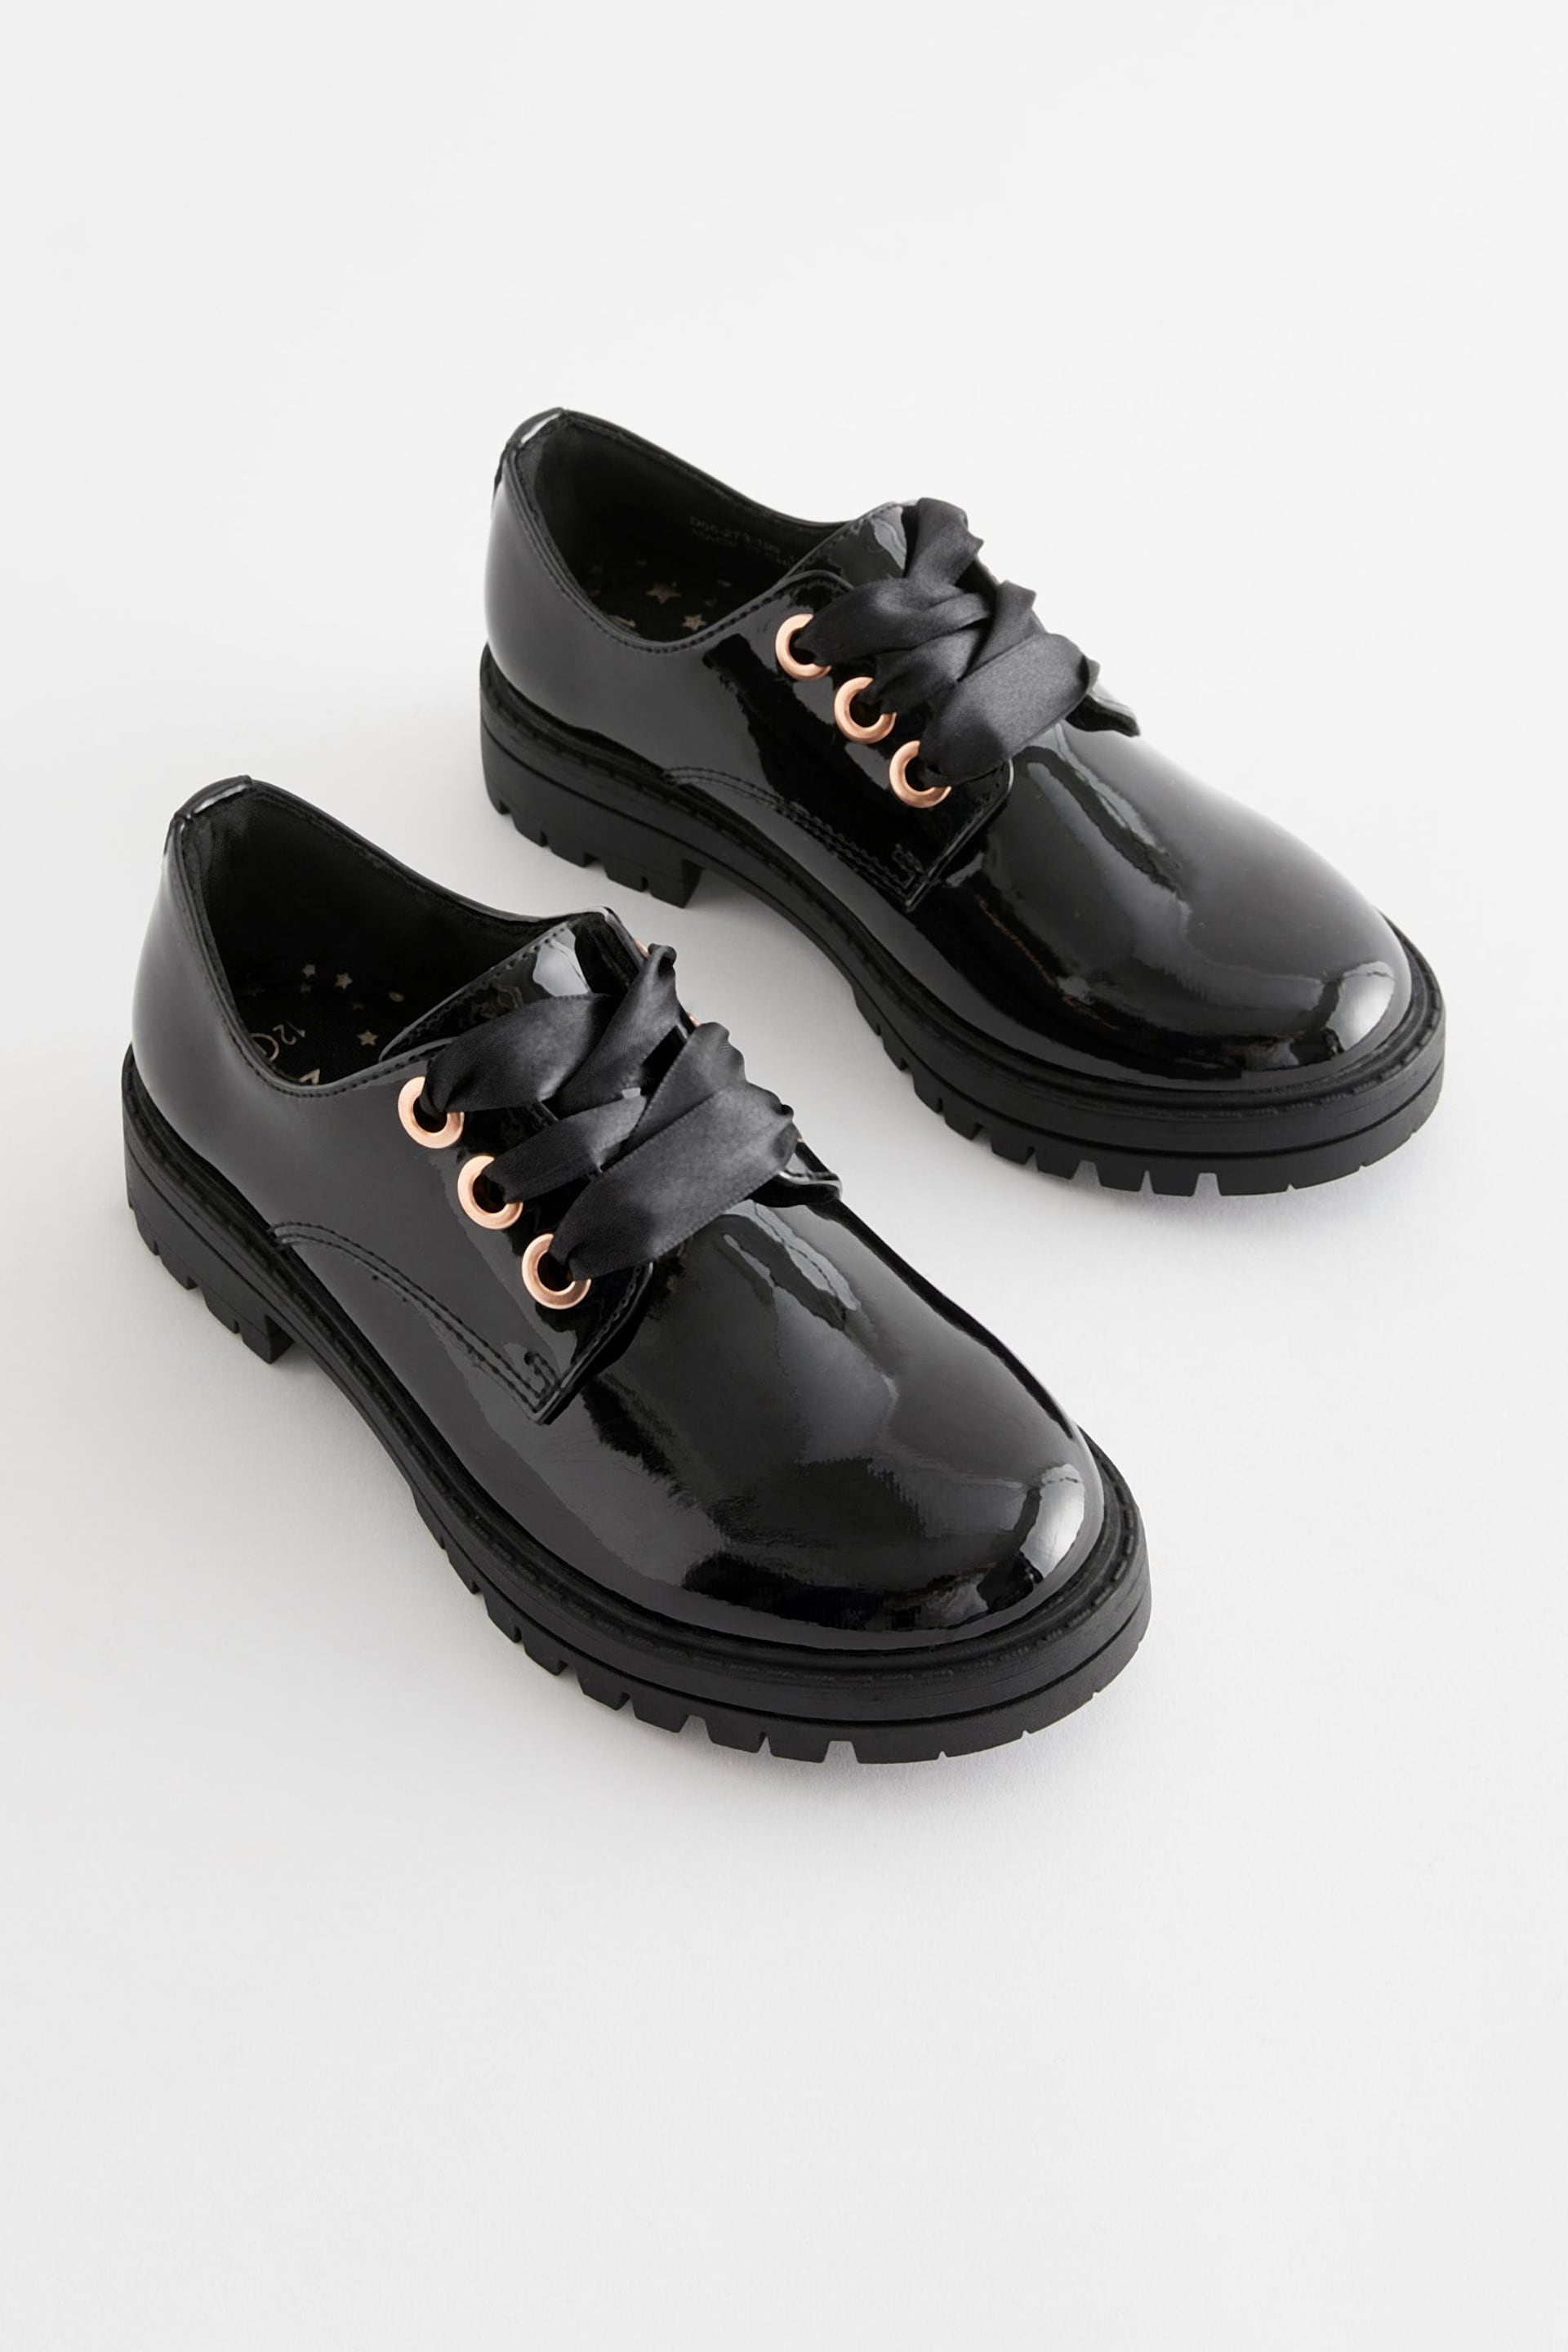 Black Patent Wide Fit (G) School Rose Gold Eyelet Lace Up Shoes - Image 1 of 6